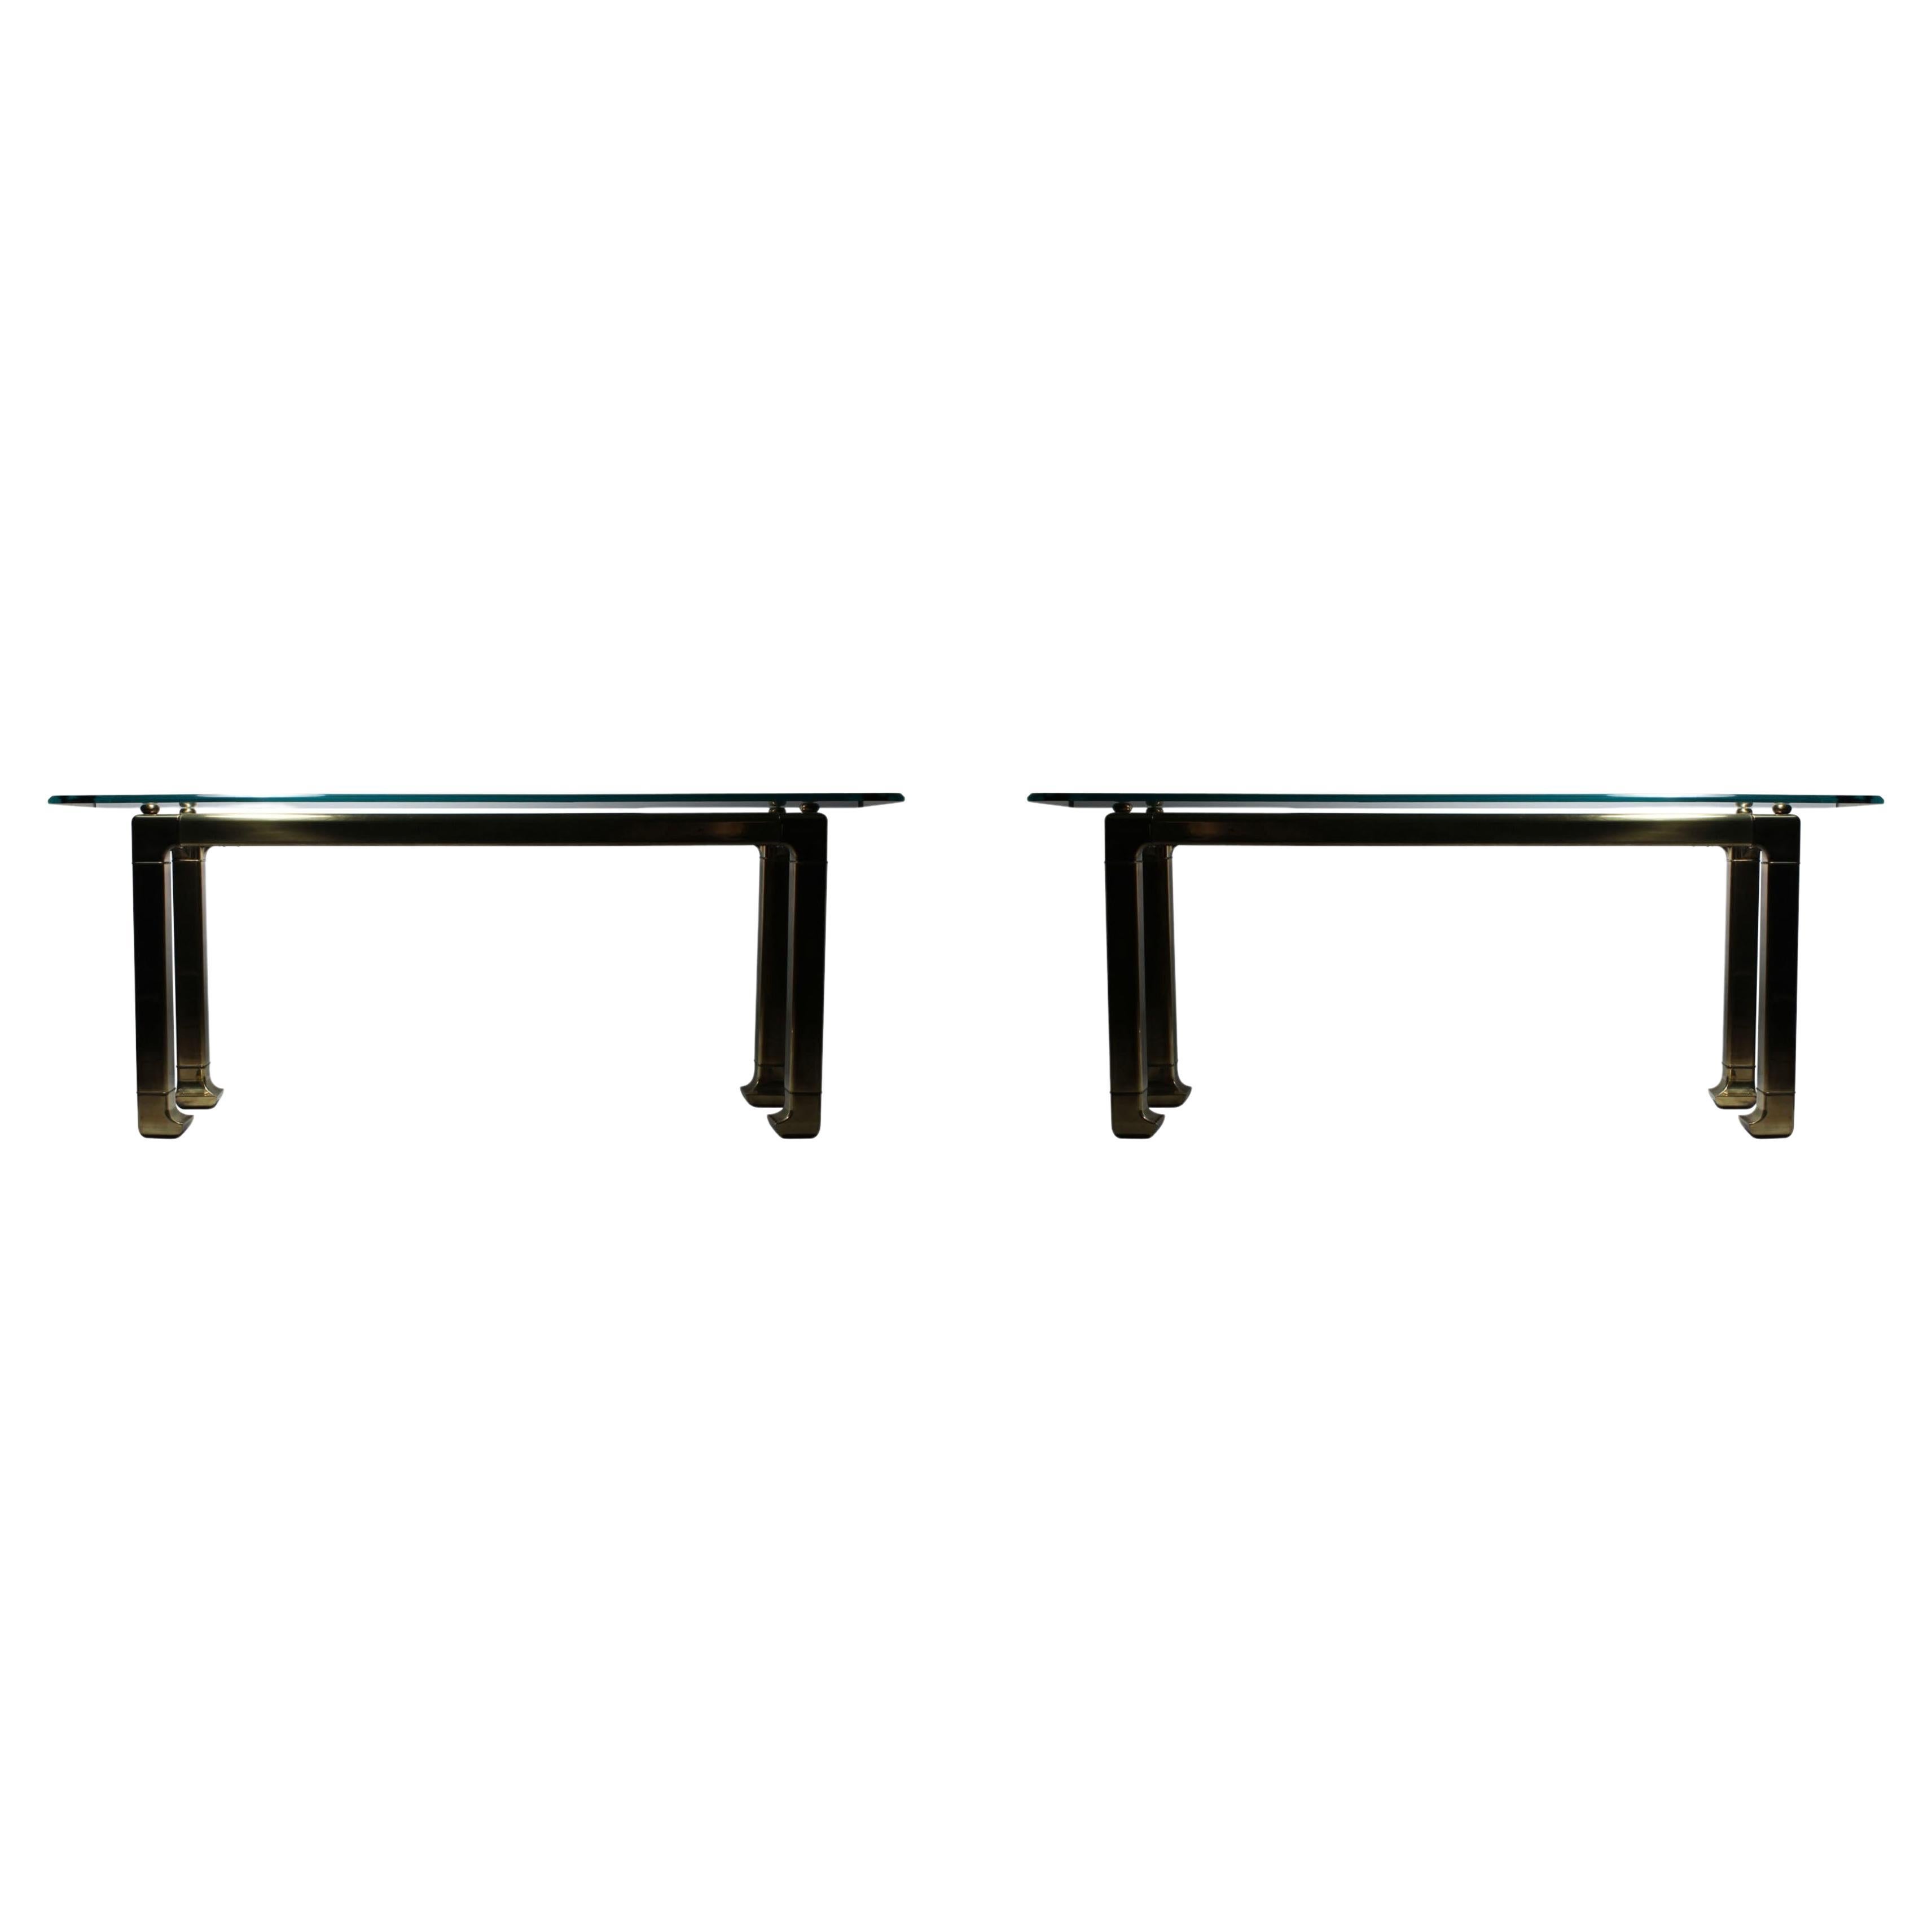 Pair of Mastercraft Glass Console Tables in the Asian Oriental Taste